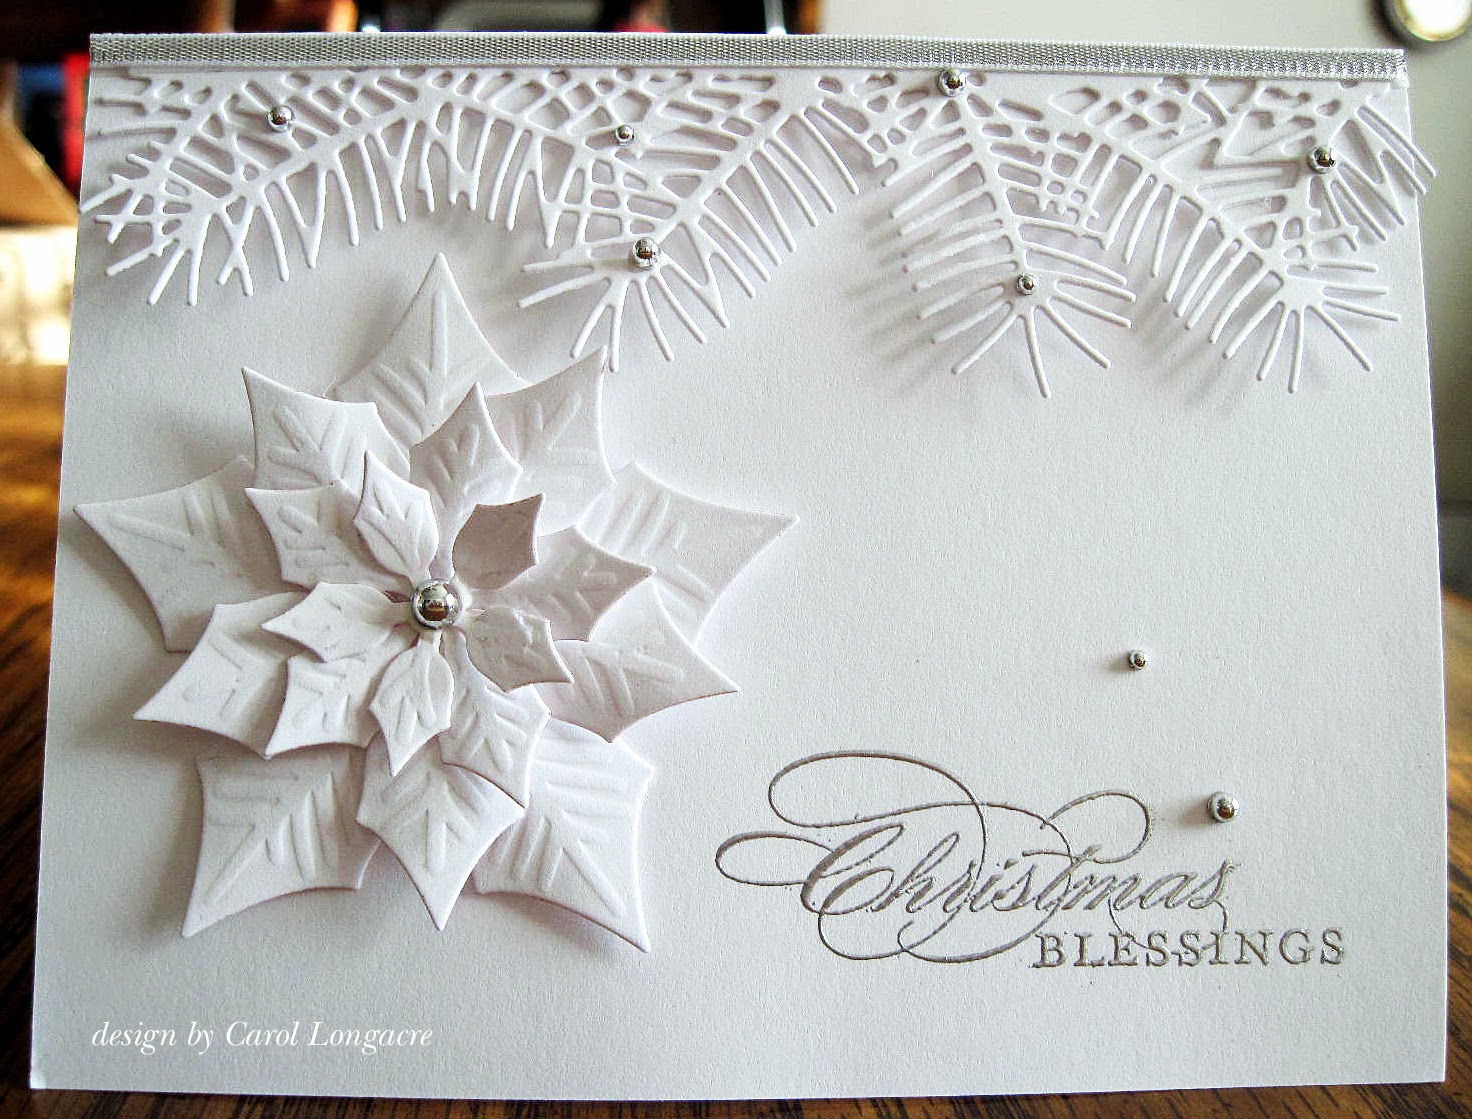 Our Little Inspirations: Silver & White Christmas Blessings